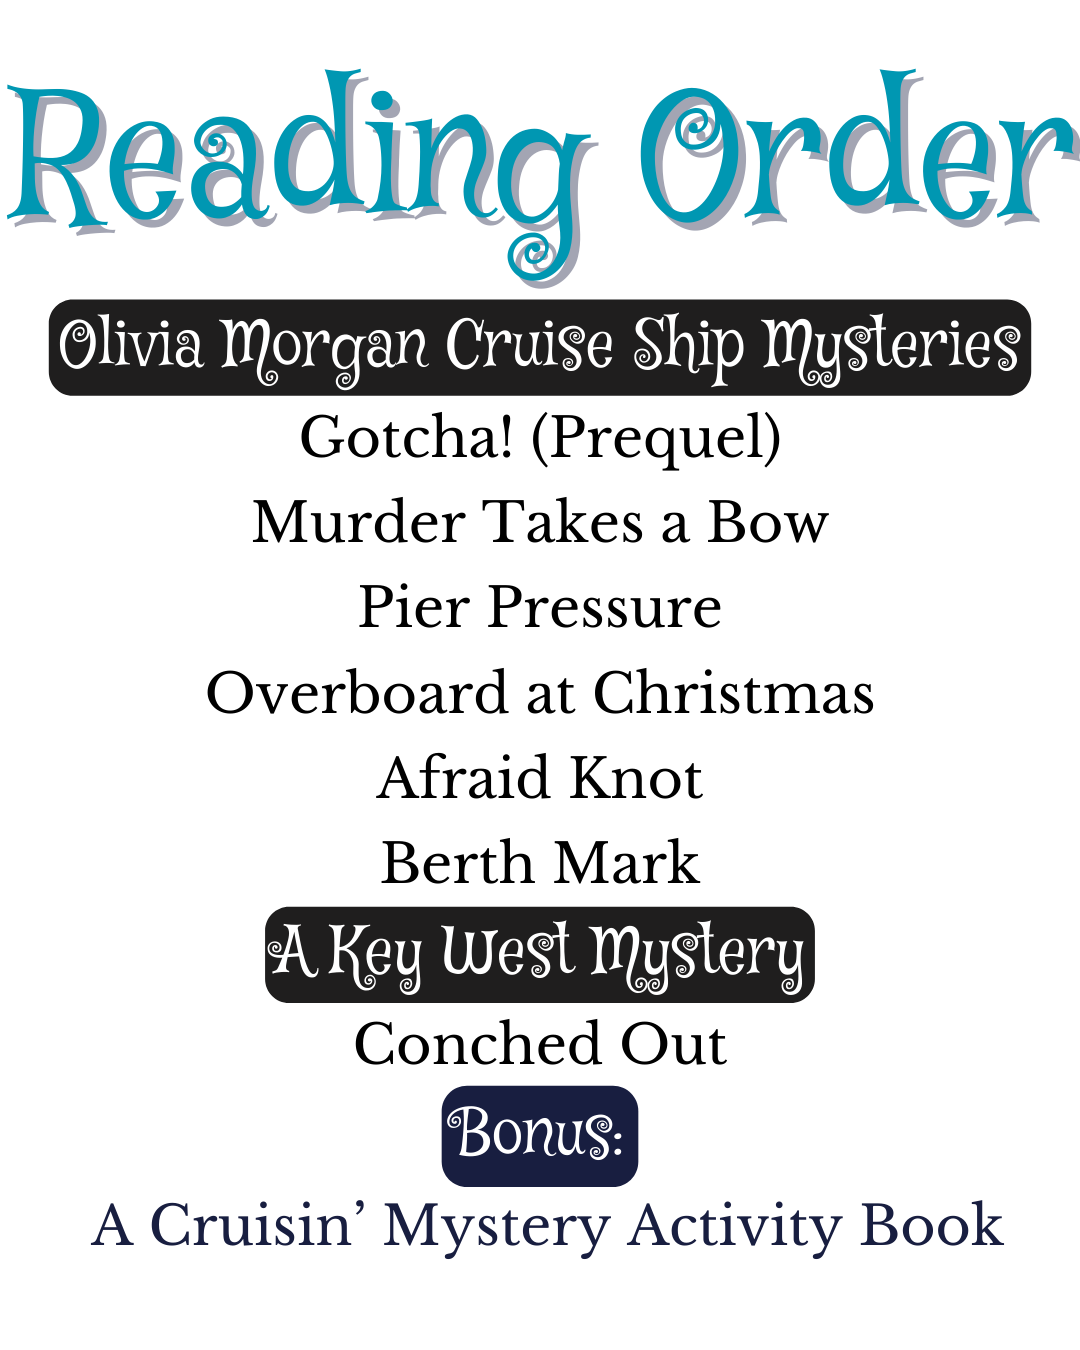 Overboard at Christmas (Hardcover)